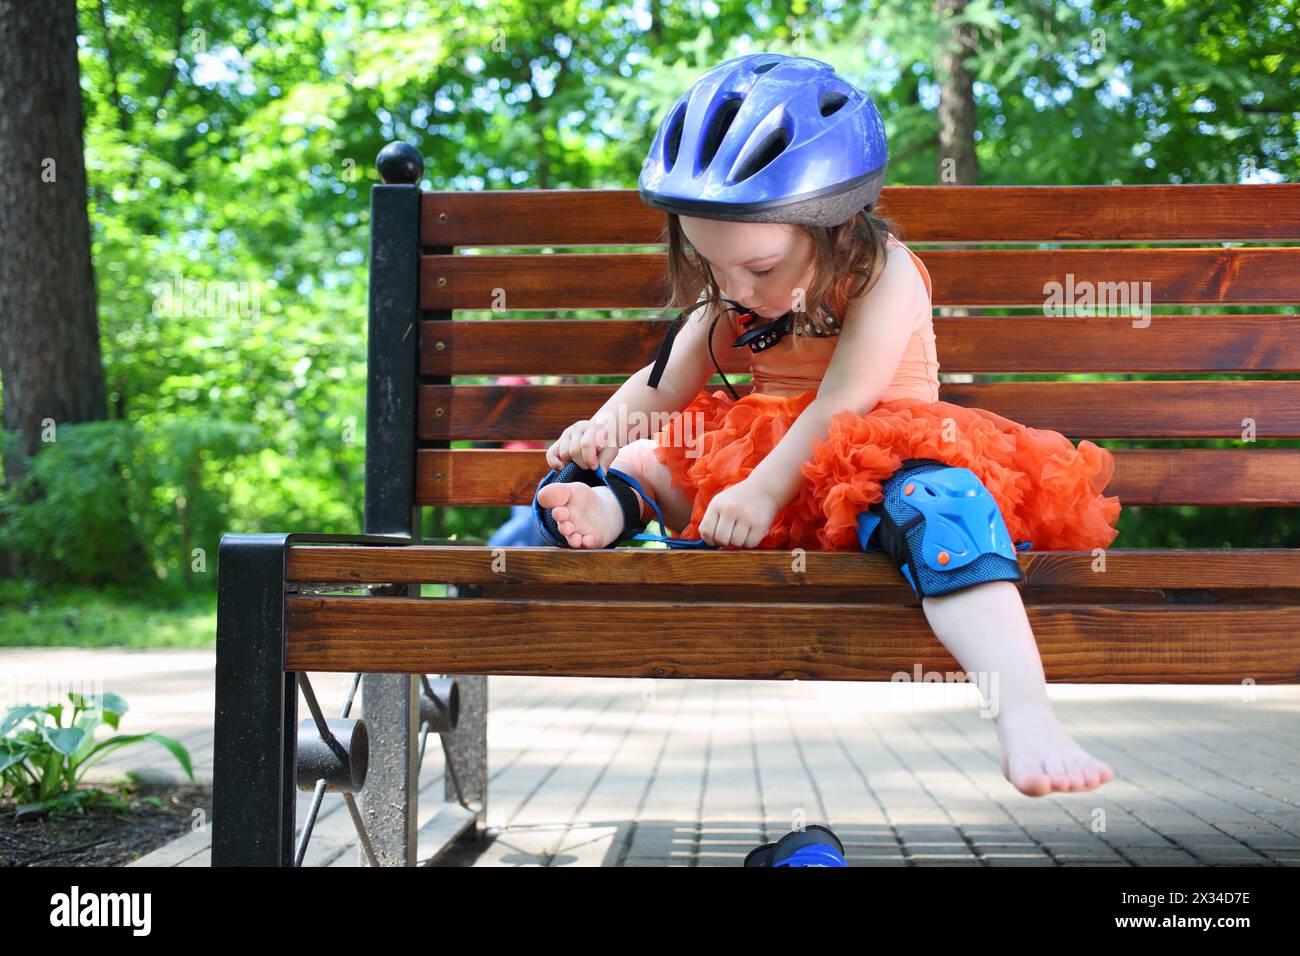 Little girl sits on bench and removes protective pads for roller skating Stock Photo